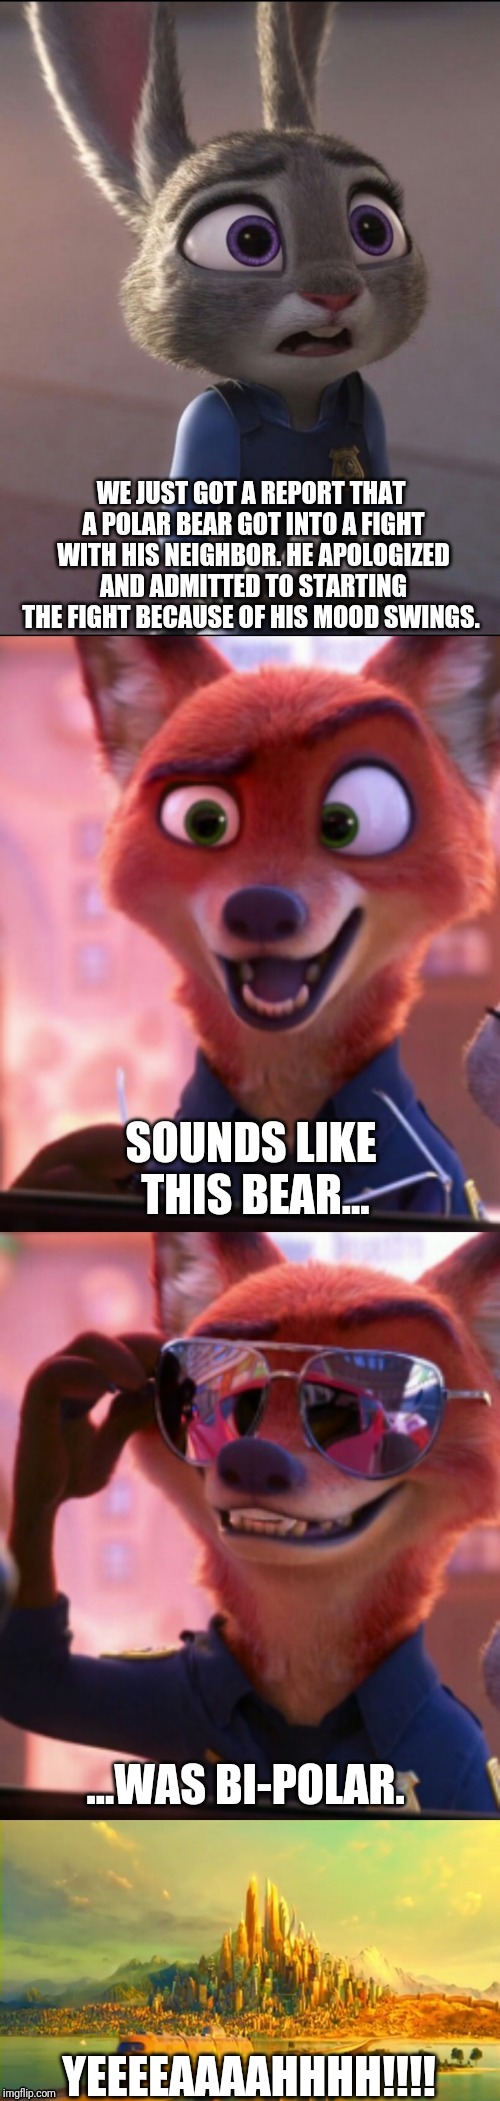 CSI: Zootopia 18 | WE JUST GOT A REPORT THAT A POLAR BEAR GOT INTO A FIGHT WITH HIS NEIGHBOR. HE APOLOGIZED AND ADMITTED TO STARTING THE FIGHT BECAUSE OF HIS MOOD SWINGS. SOUNDS LIKE THIS BEAR... ...WAS BI-POLAR. YEEEEAAAAHHHH!!!! | image tagged in csi zootopia,zootopia,judy hopps,nick wilde,parody,funny | made w/ Imgflip meme maker